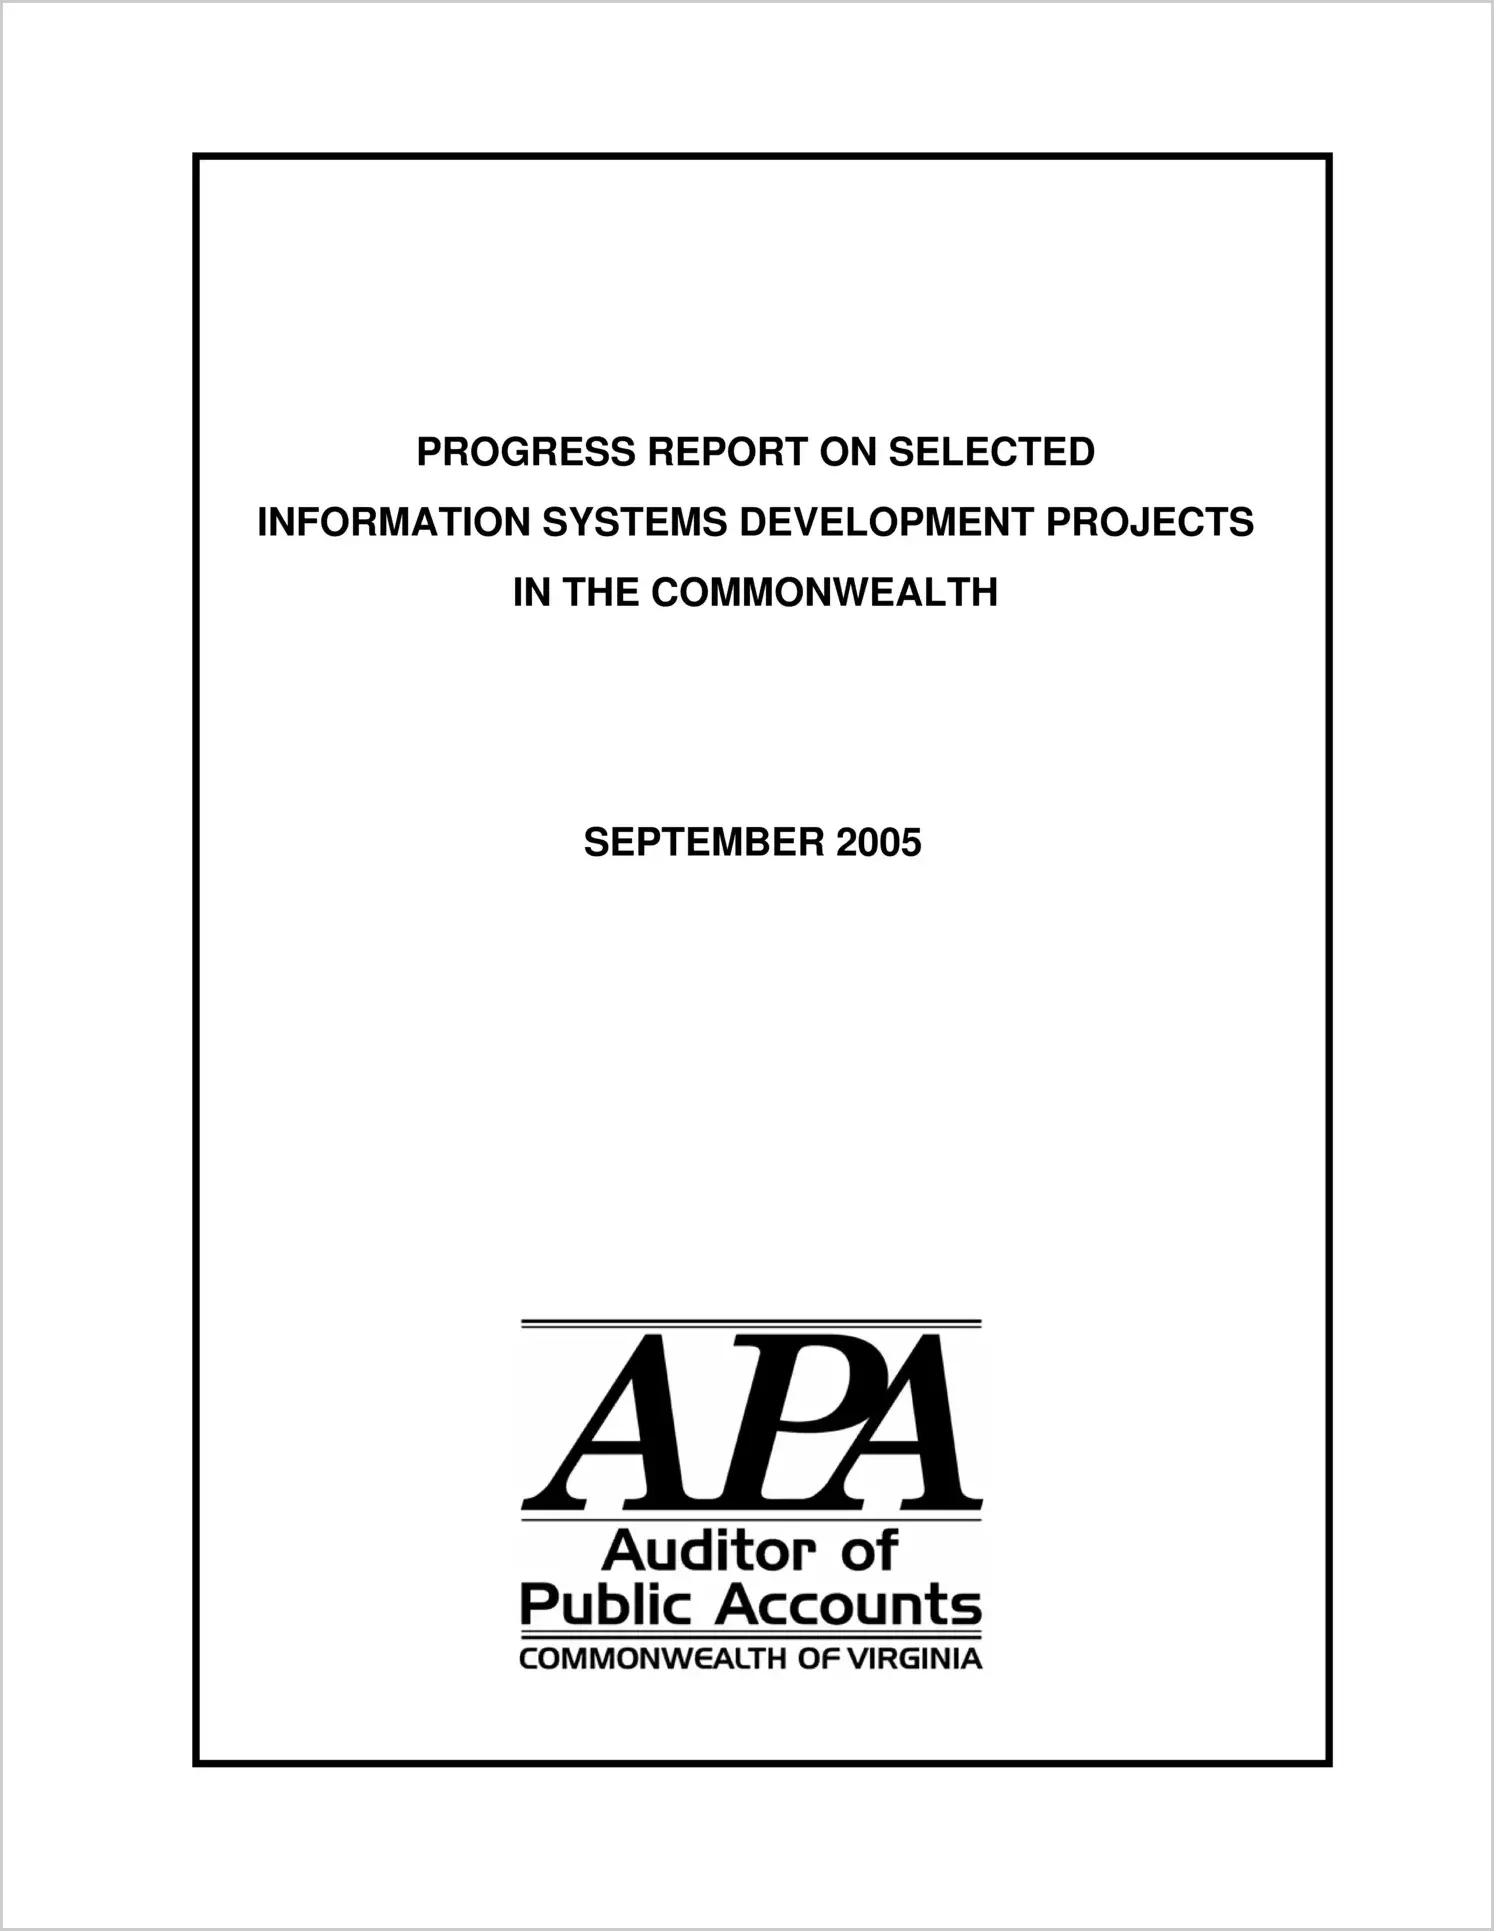 Progress Report on Selected Information Systems Development Projects in the Commonwealth, September 2005